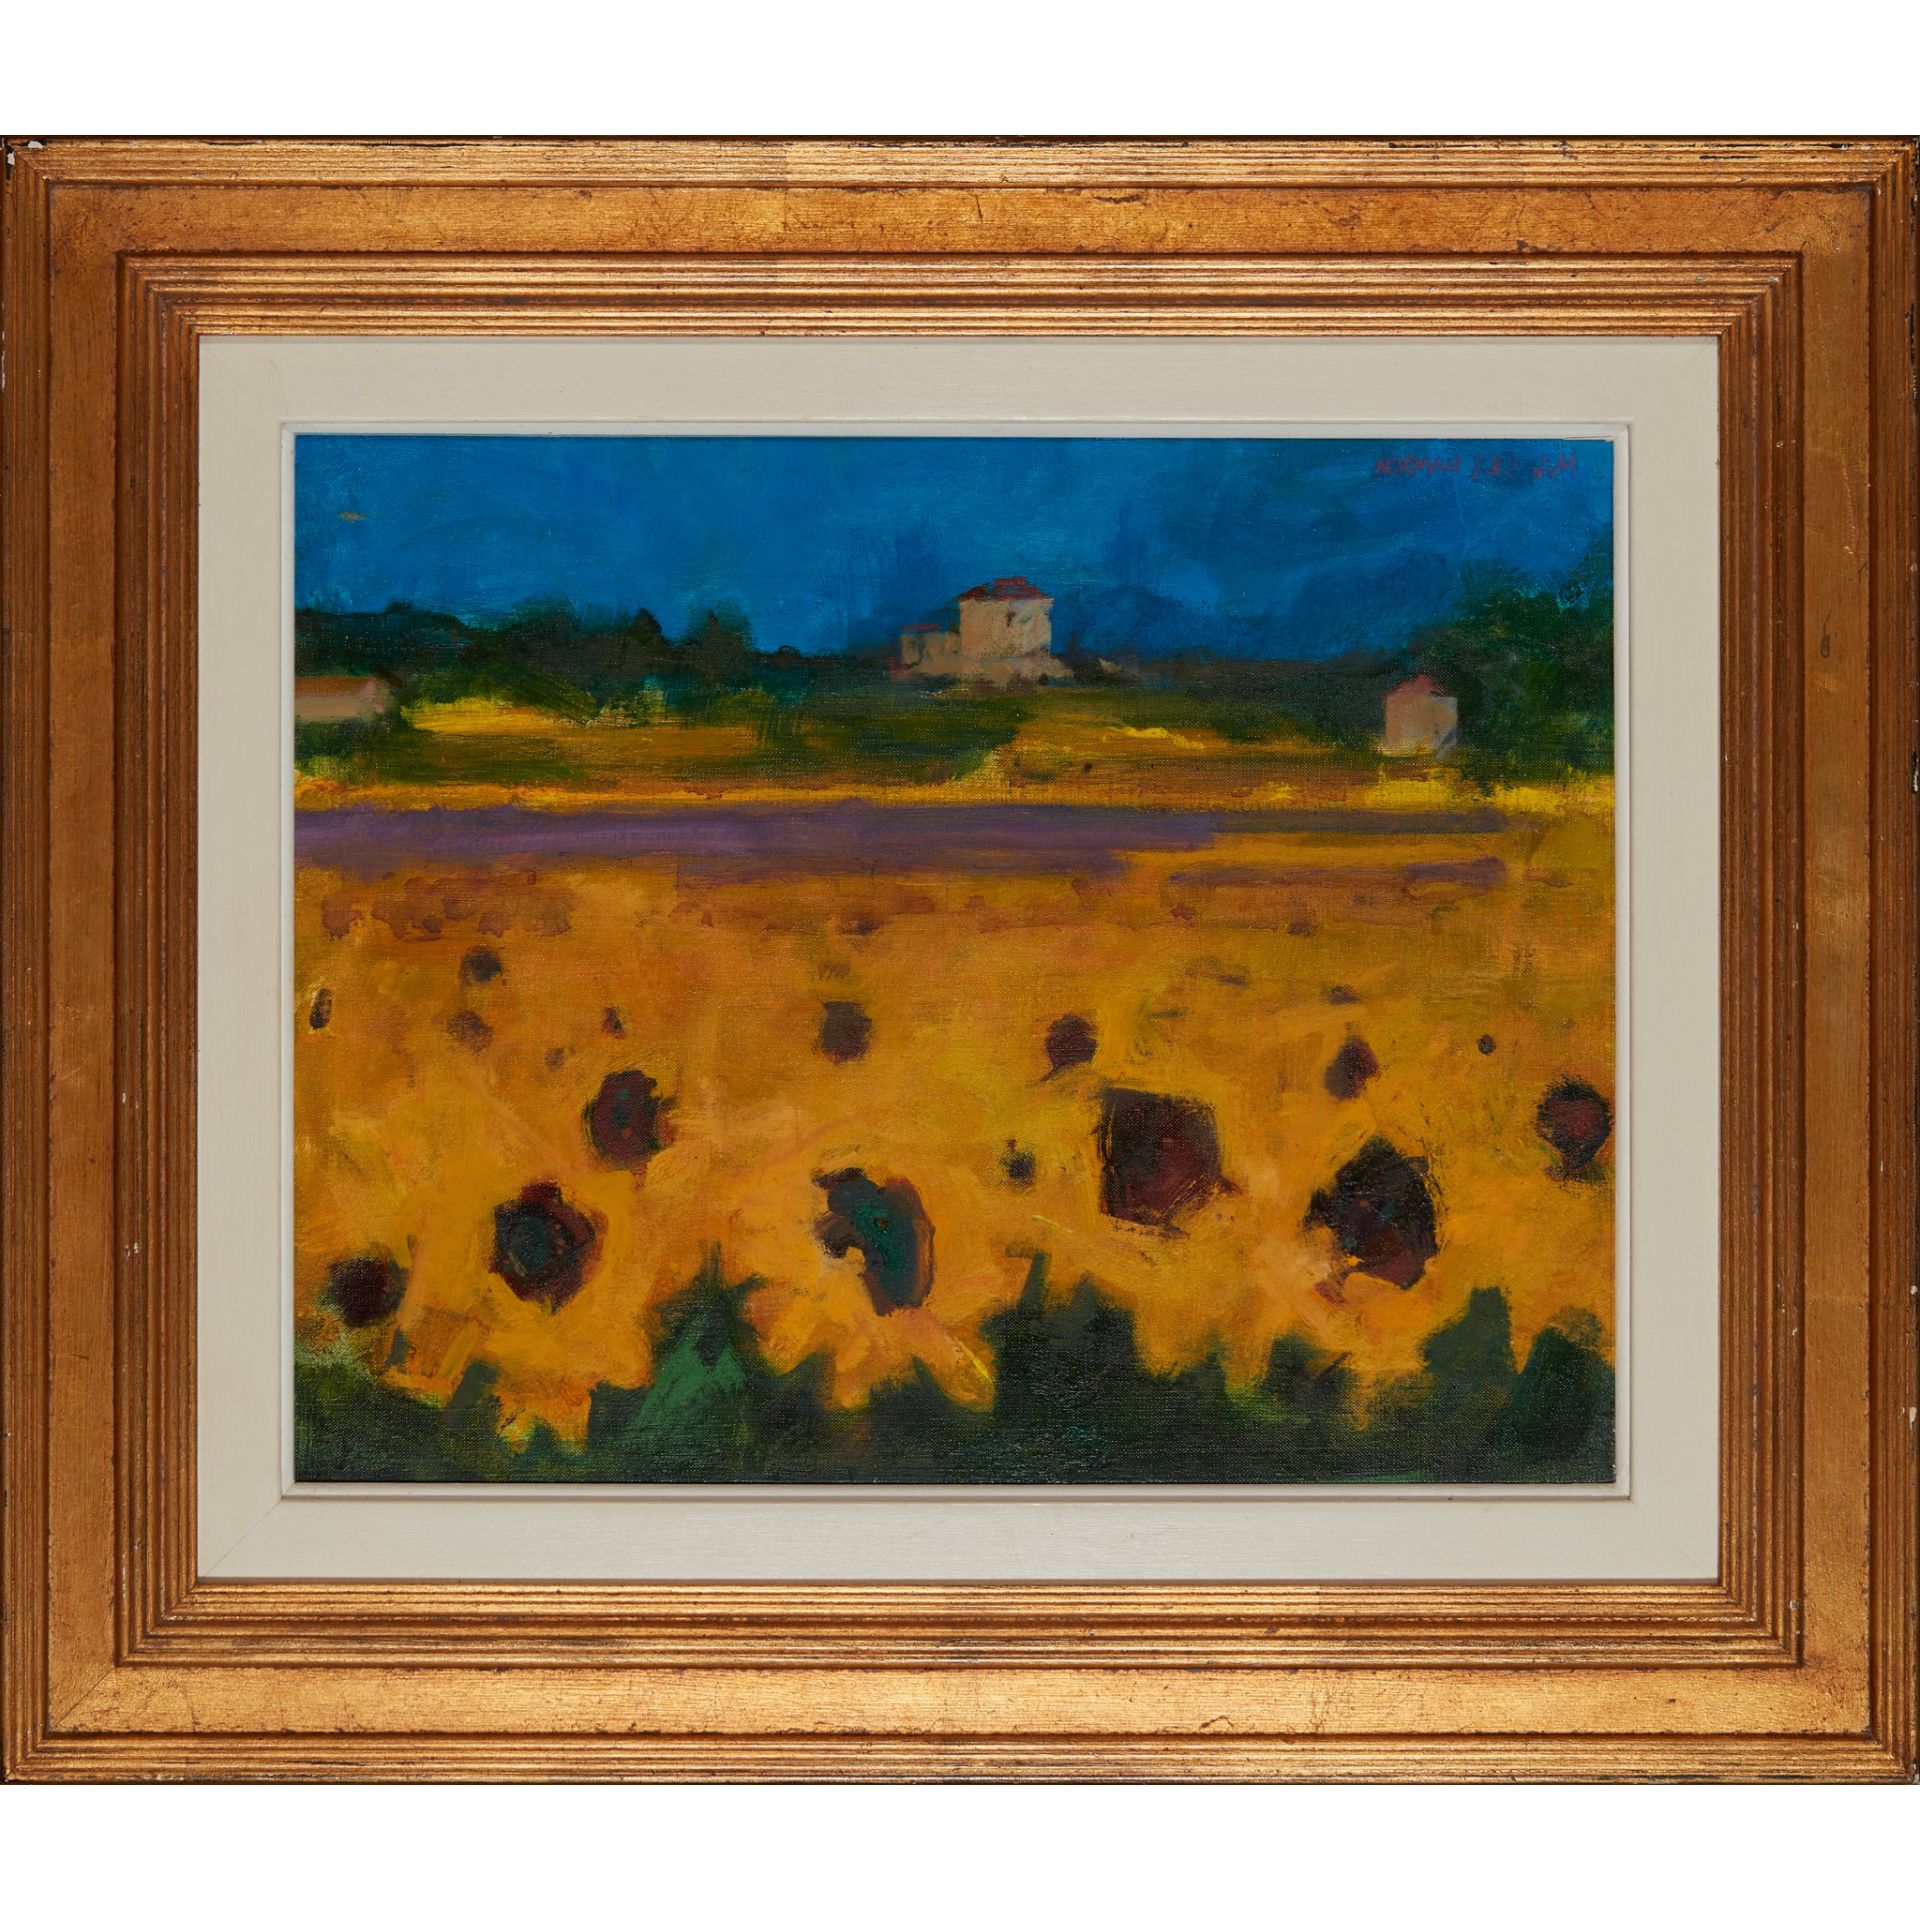 § NORMAN KIRKHAM R.G.I. (SCOTTISH 1936-2021) SUNFLOWERS IN SOUTH OF FRANCE - Image 2 of 3